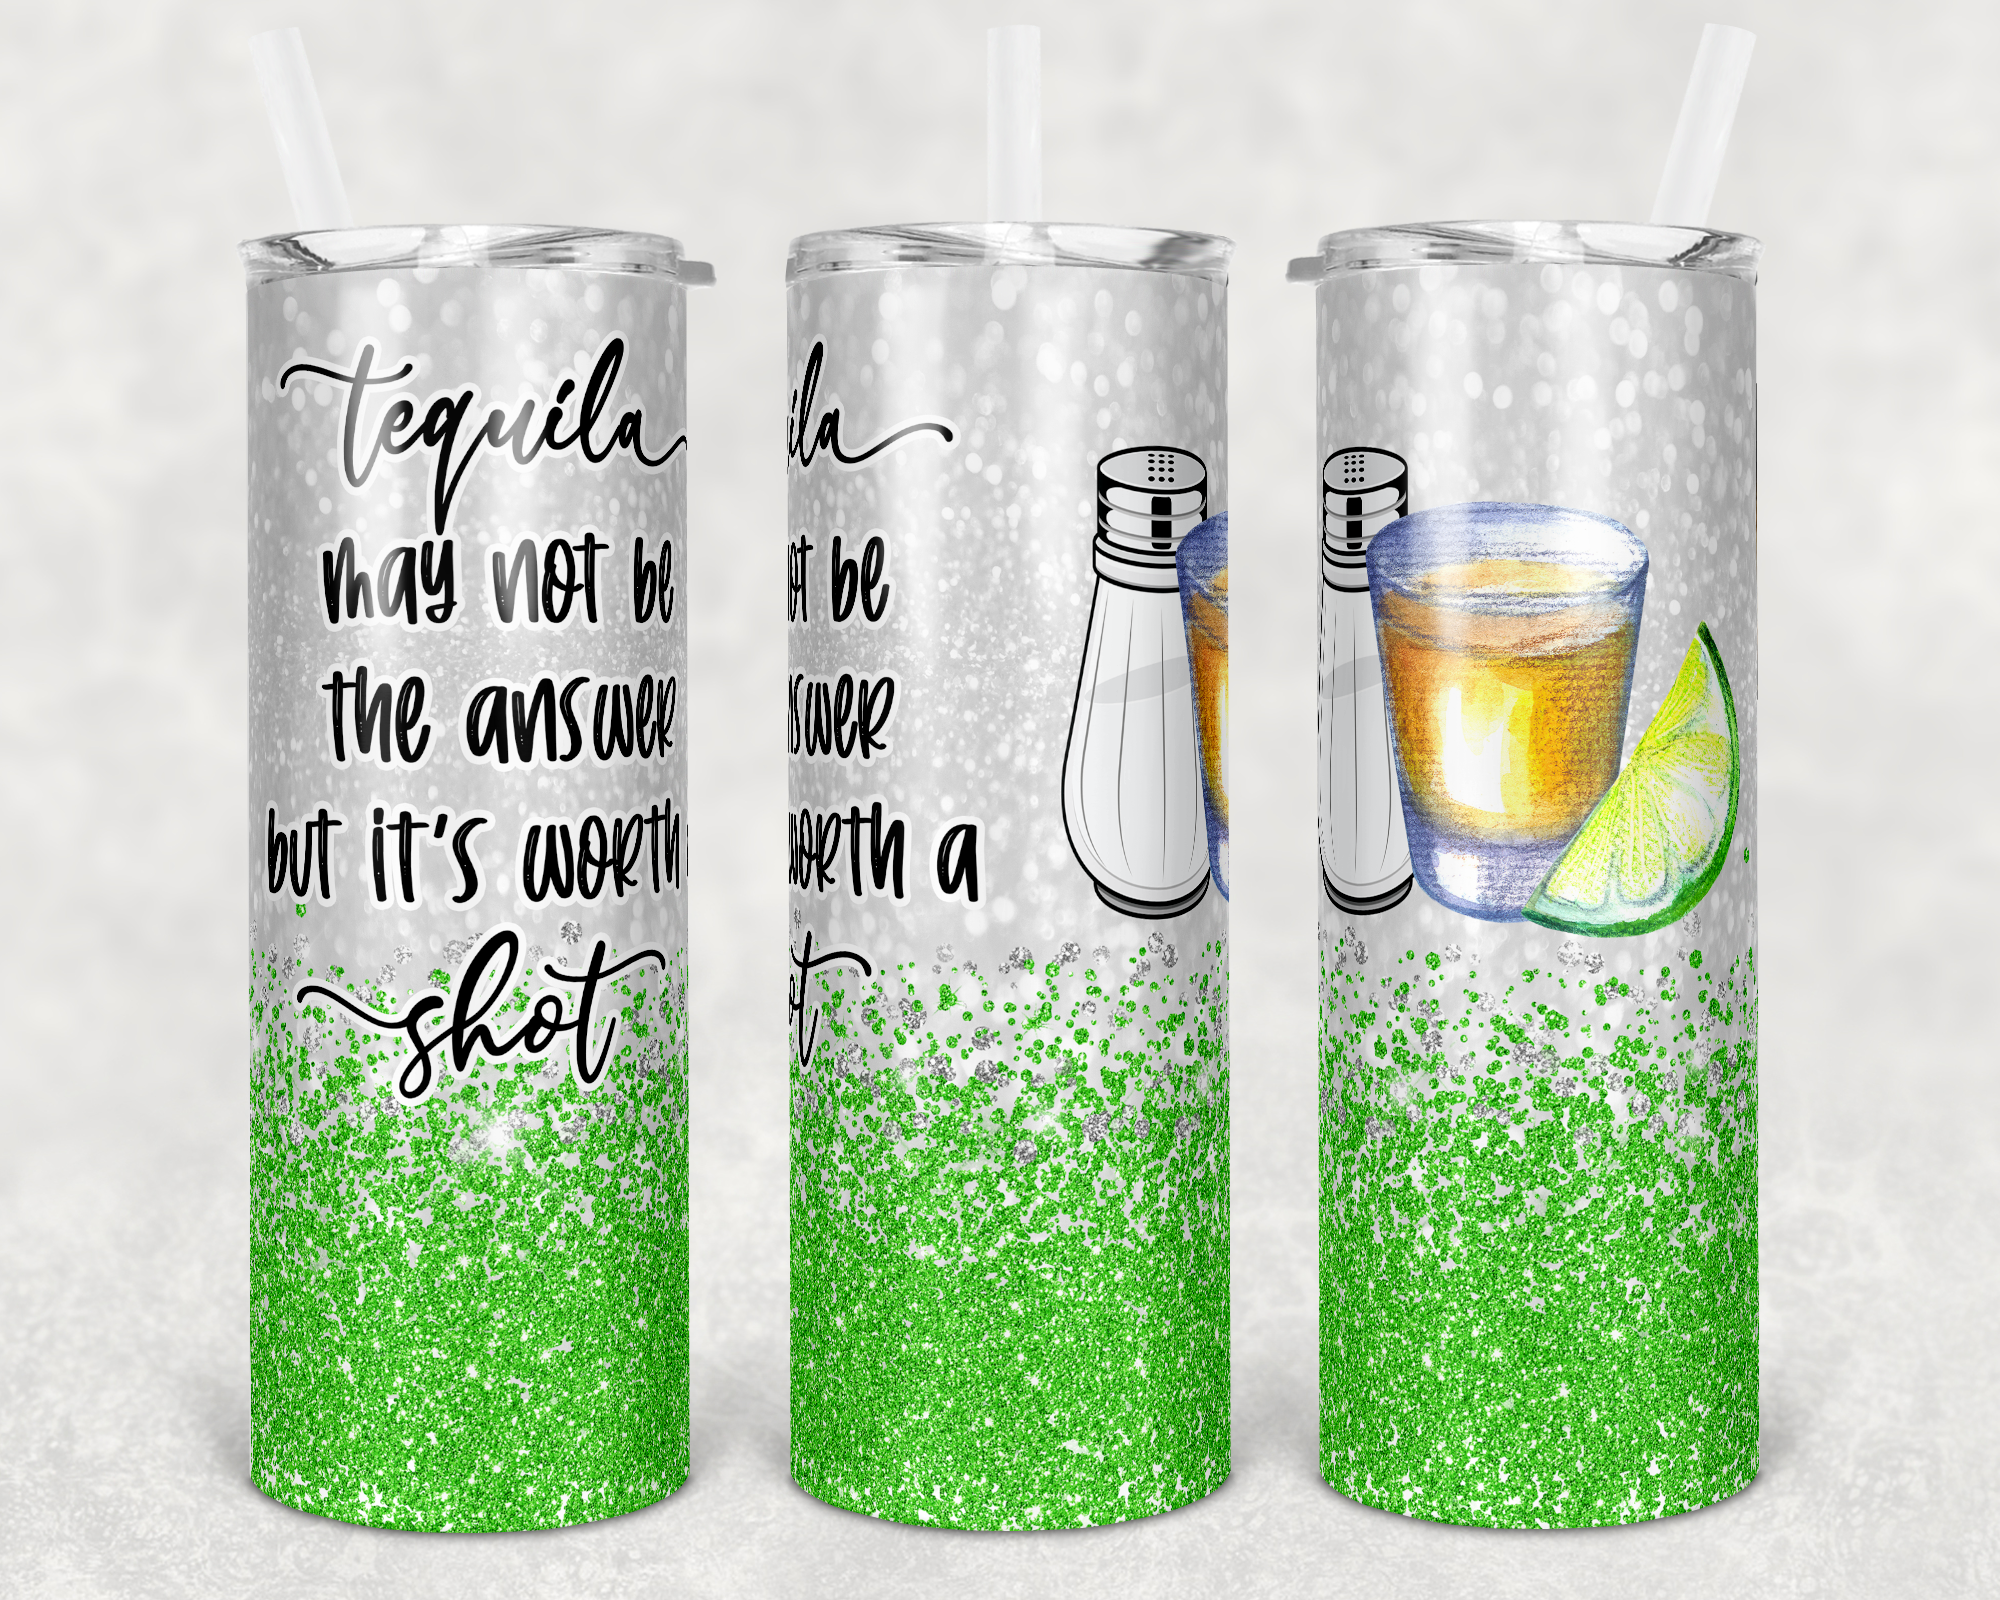 If You're Gonna Be Salty Bring The Tequila 20 oz Insulated Tumbler